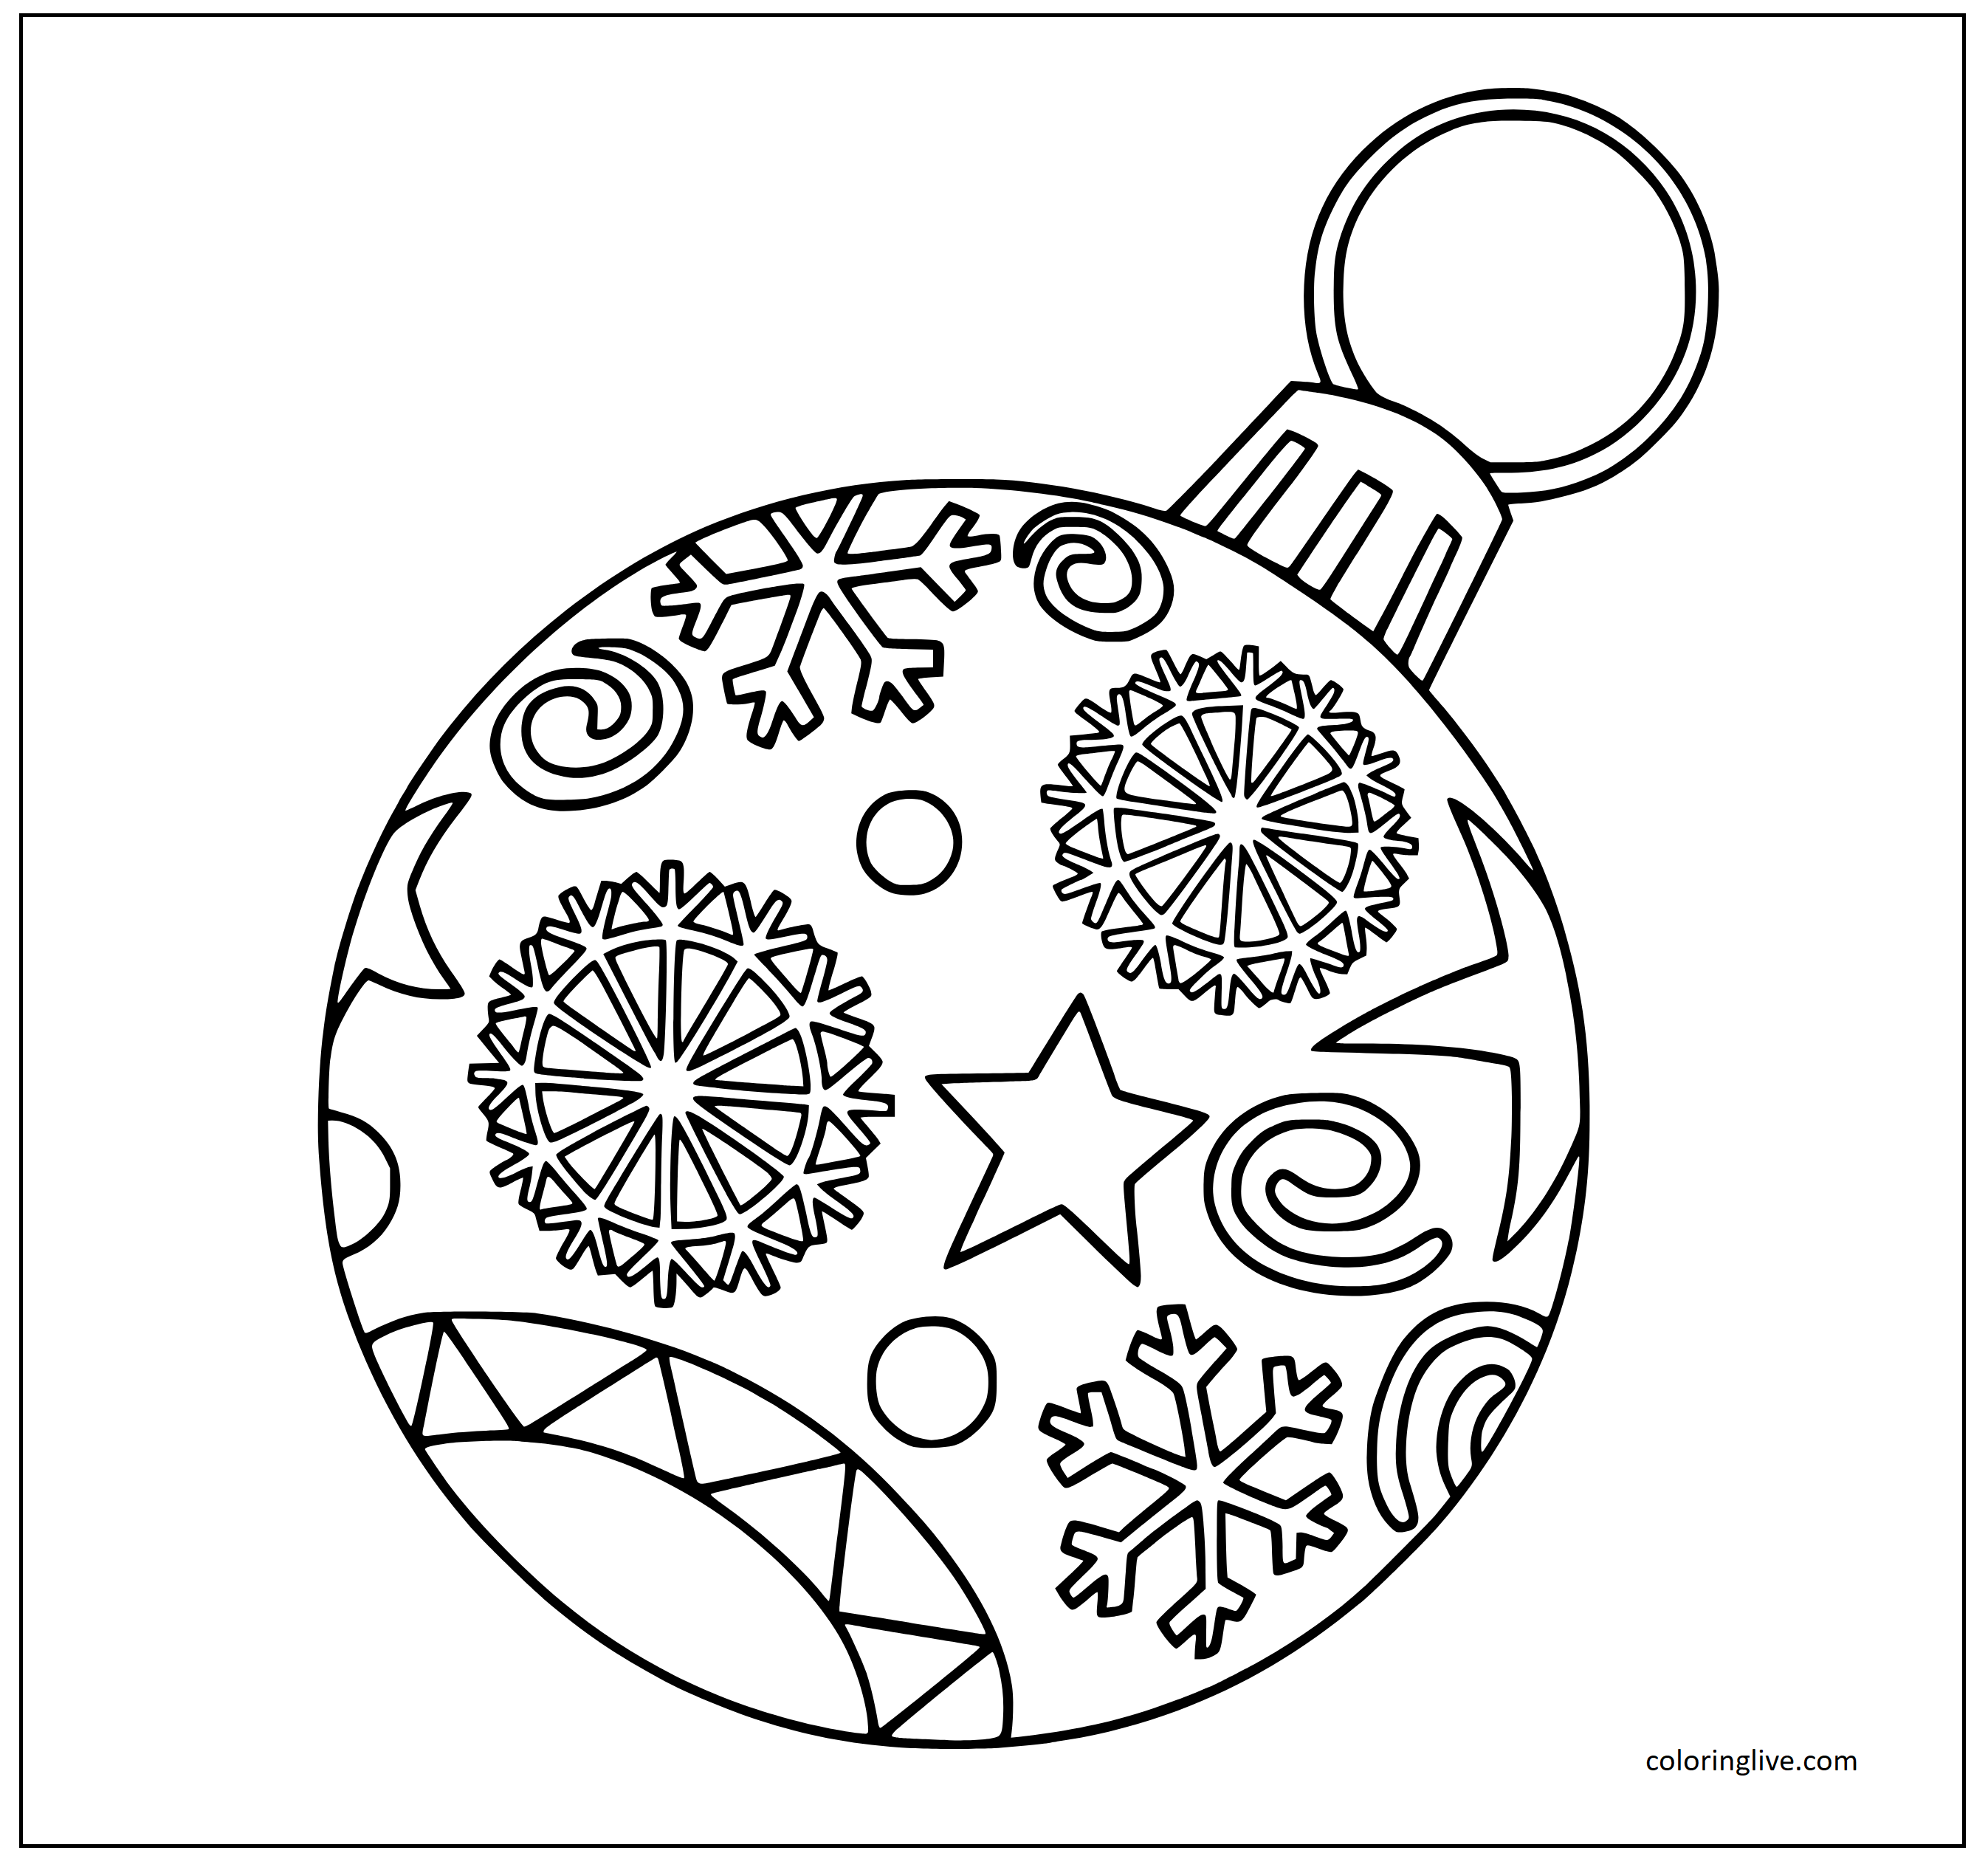 Printable Snowflakes, Stars in a Christmas Ornament Coloring Page for kids.